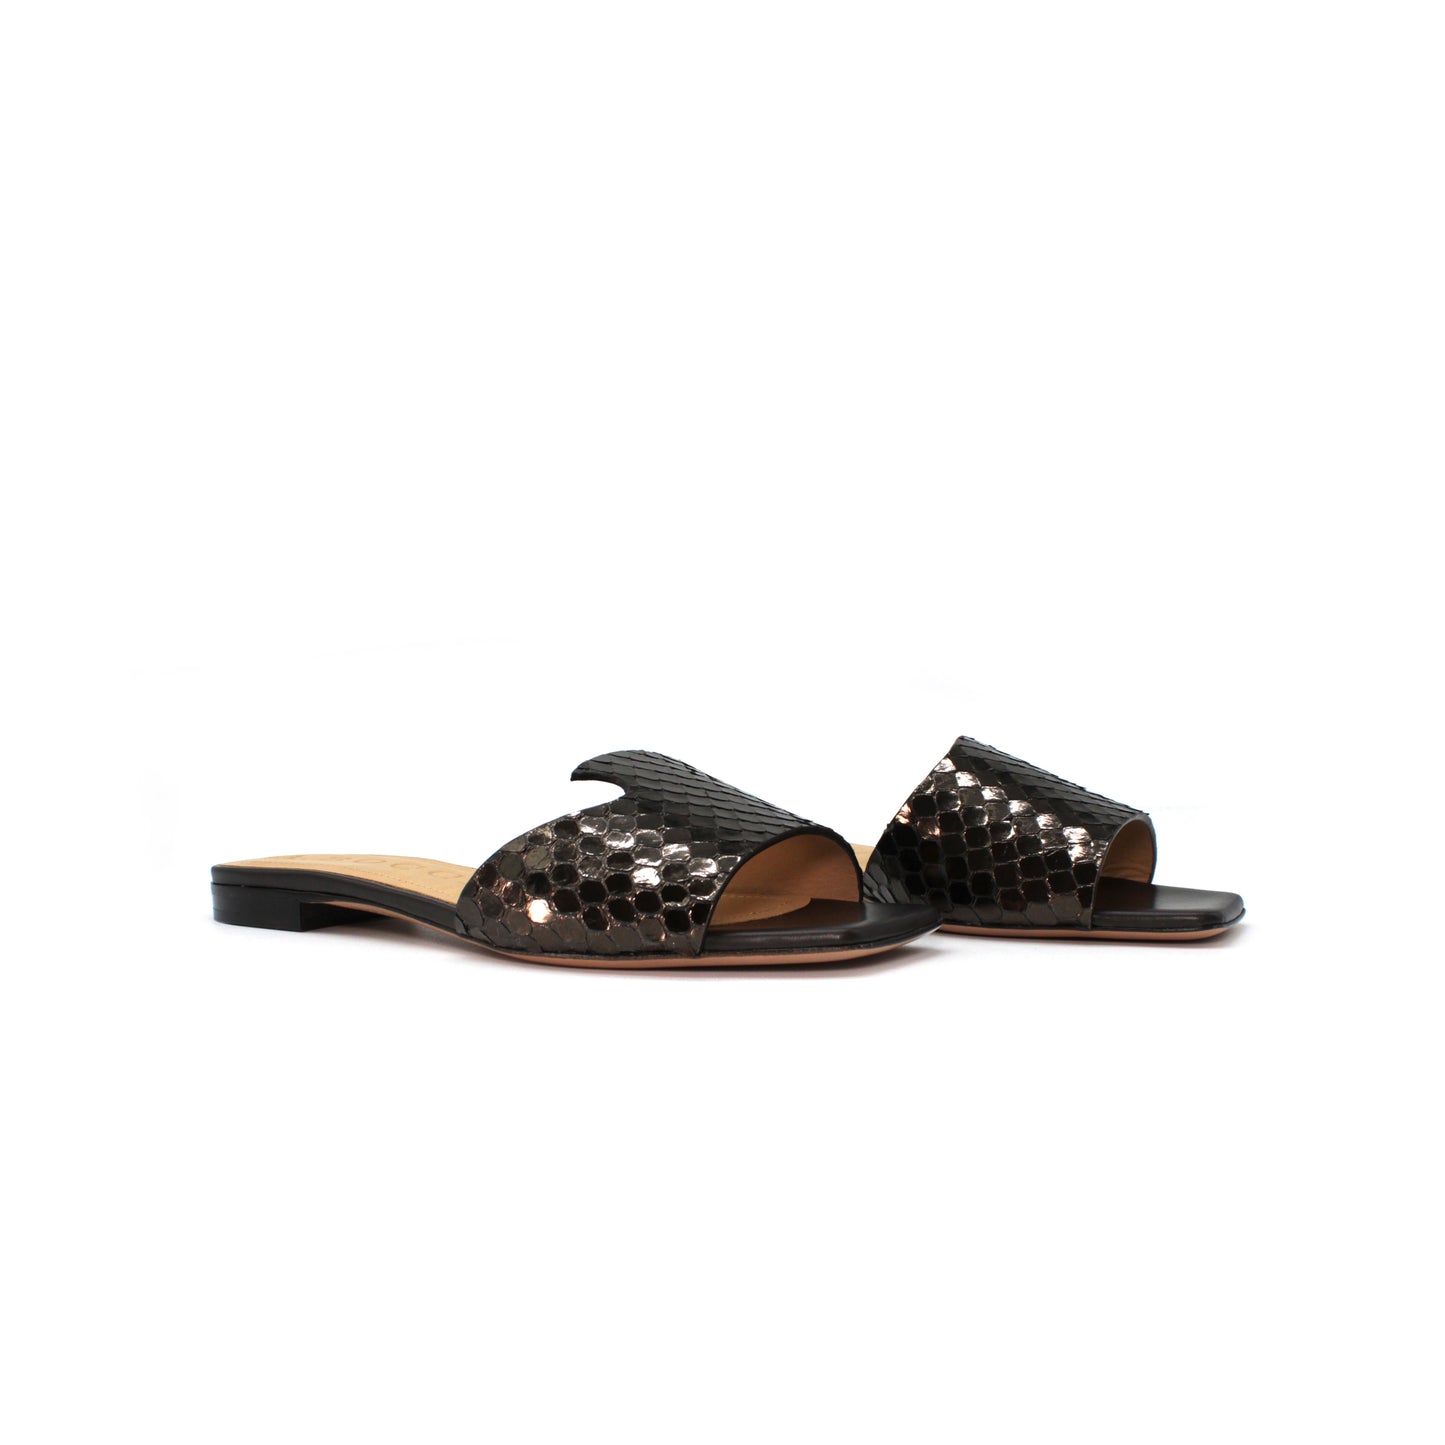 A.Bocca Slide in gunmetal-colored laminated leather